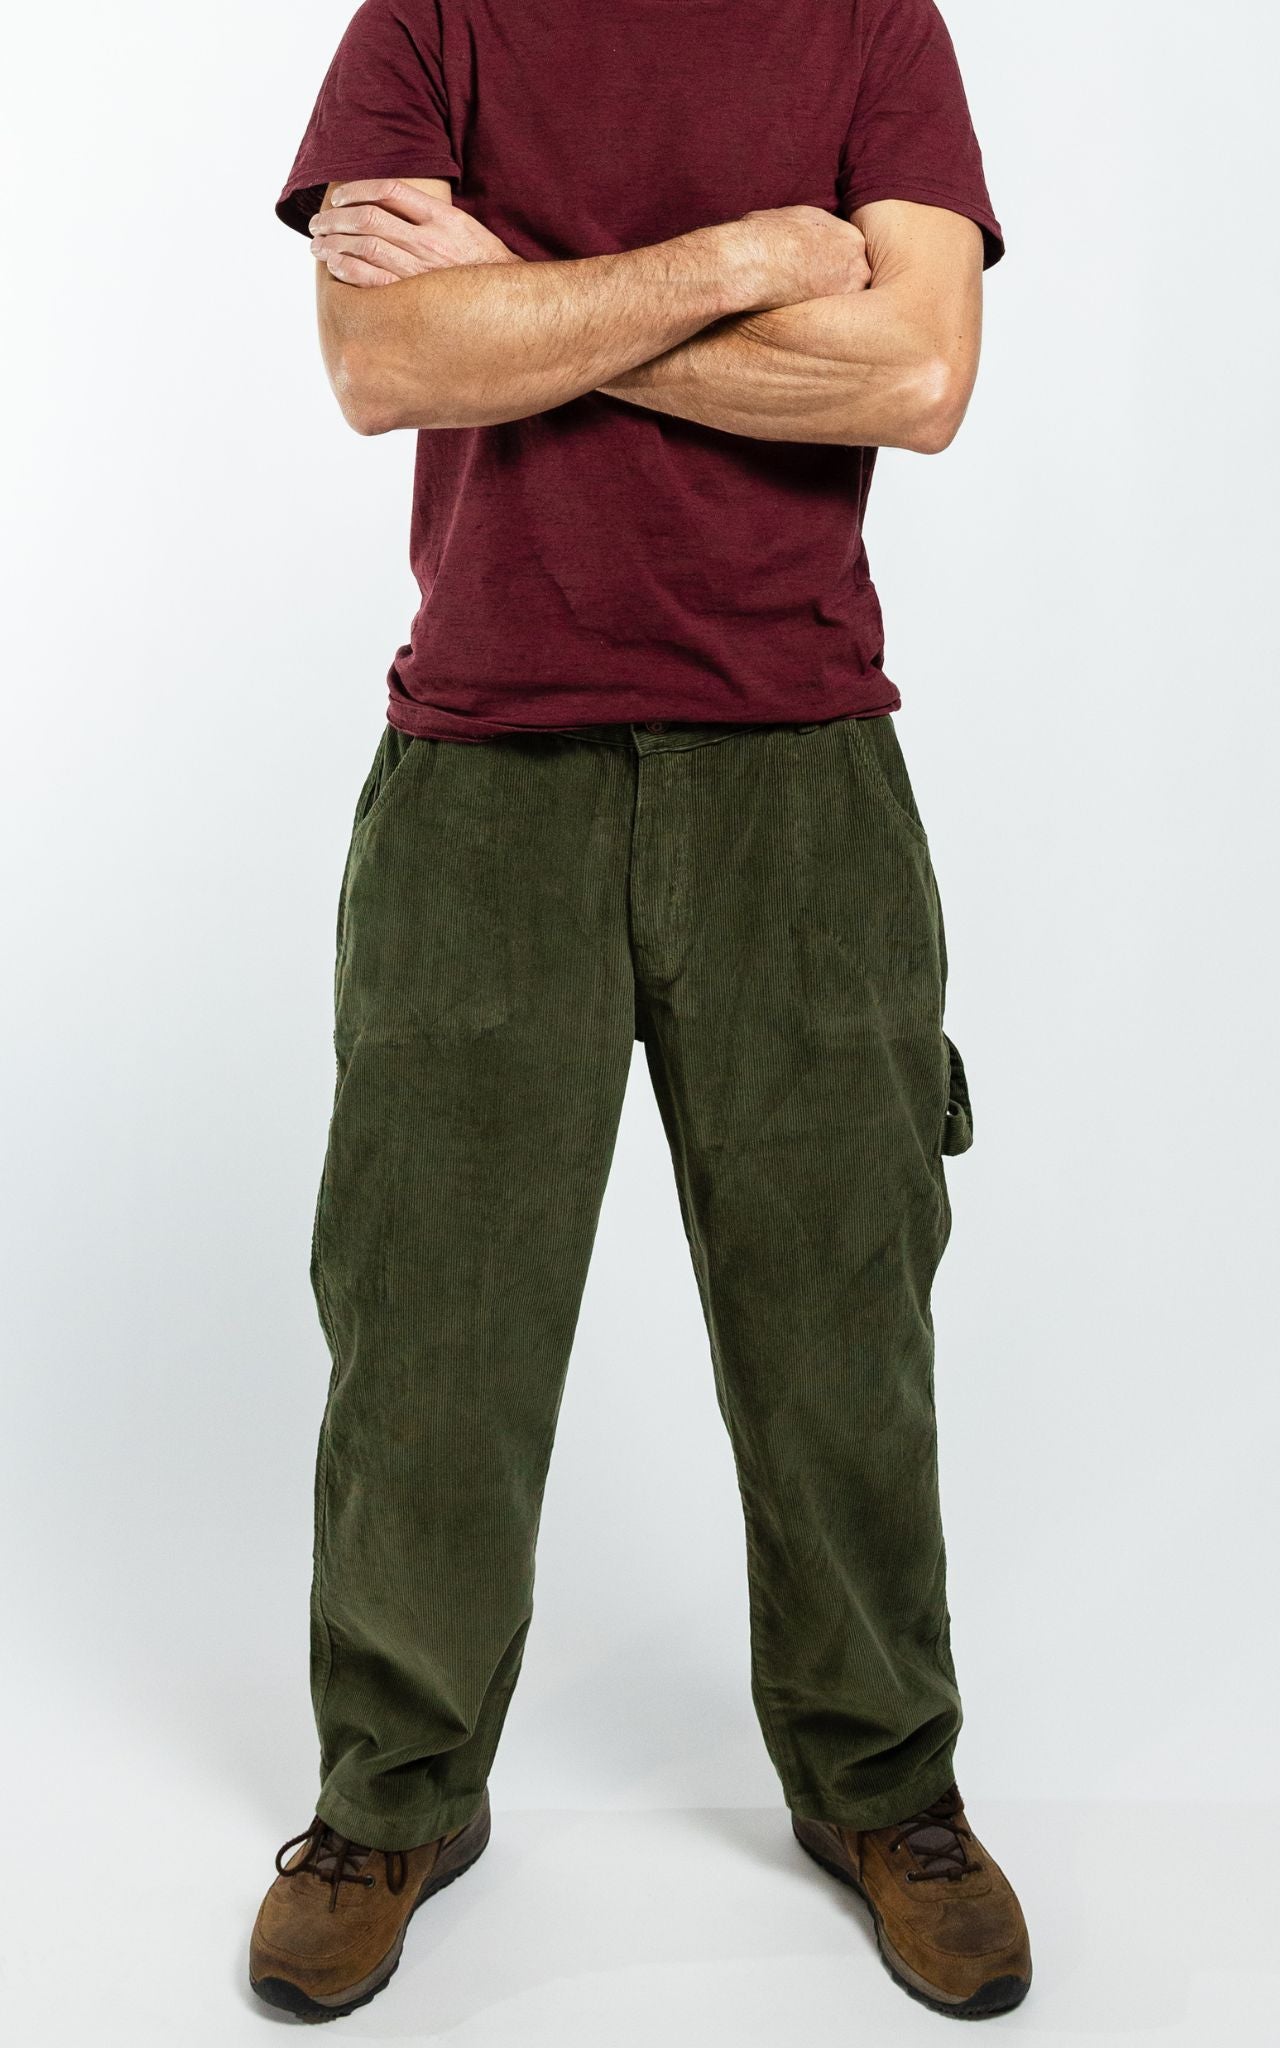 Surya Corduroy Trousers for Men from Nepal